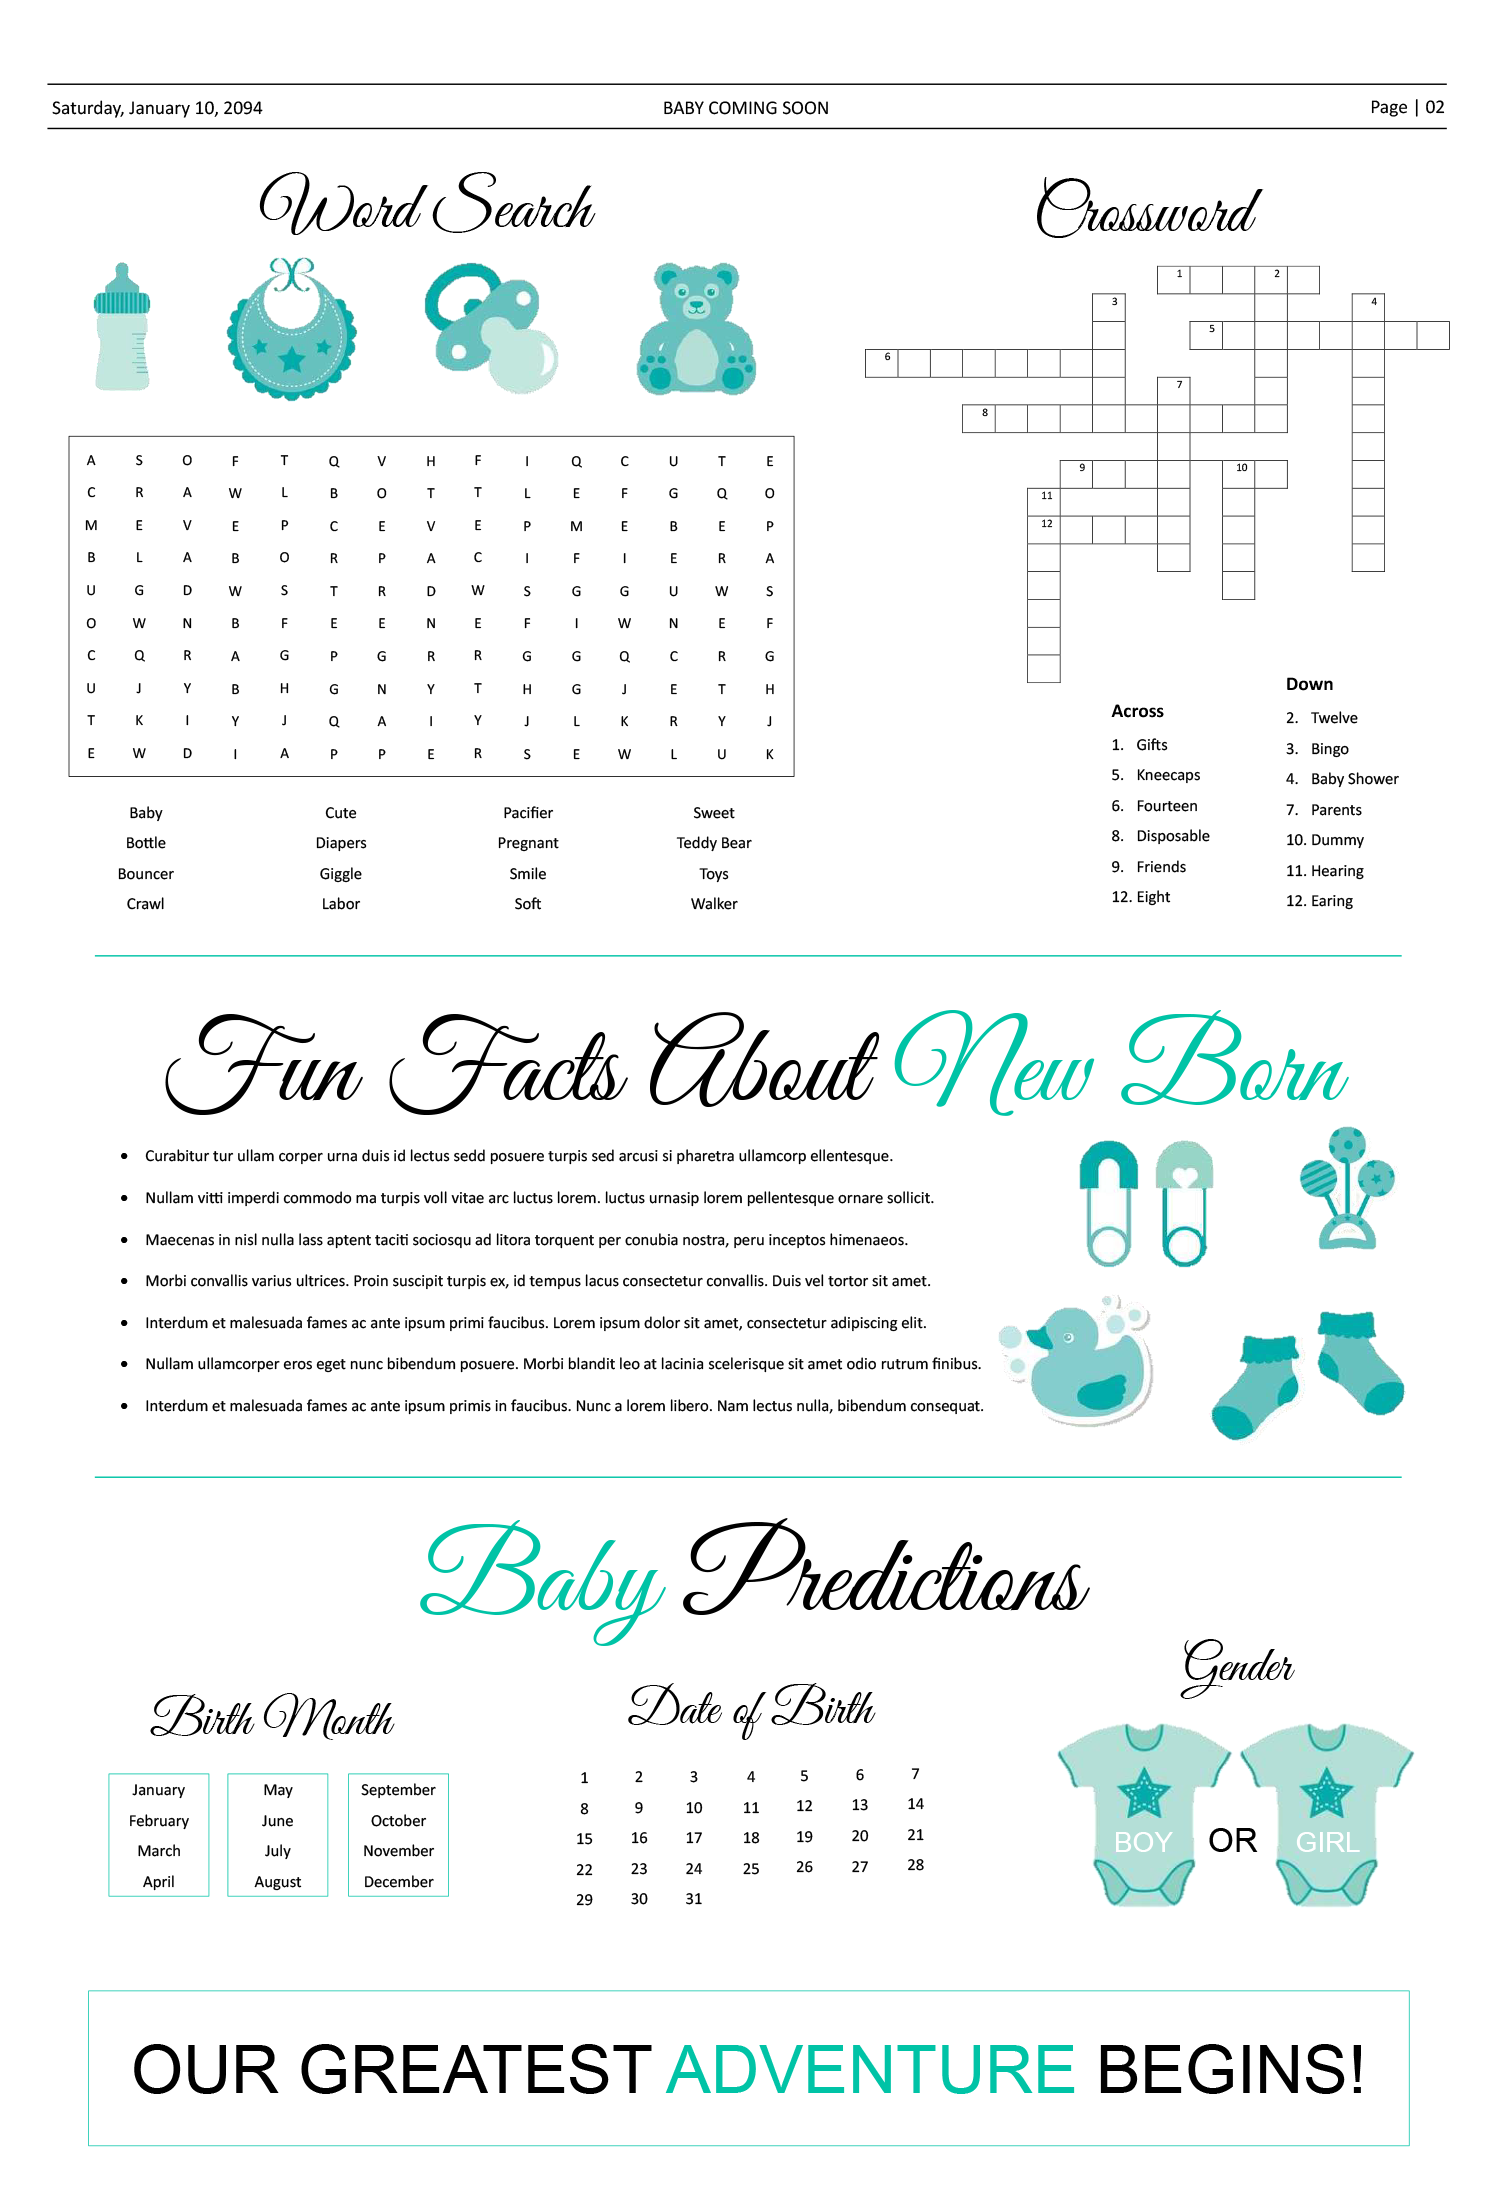 Broadsheet Pregnancy Announcement Newspaper Template - Page 02